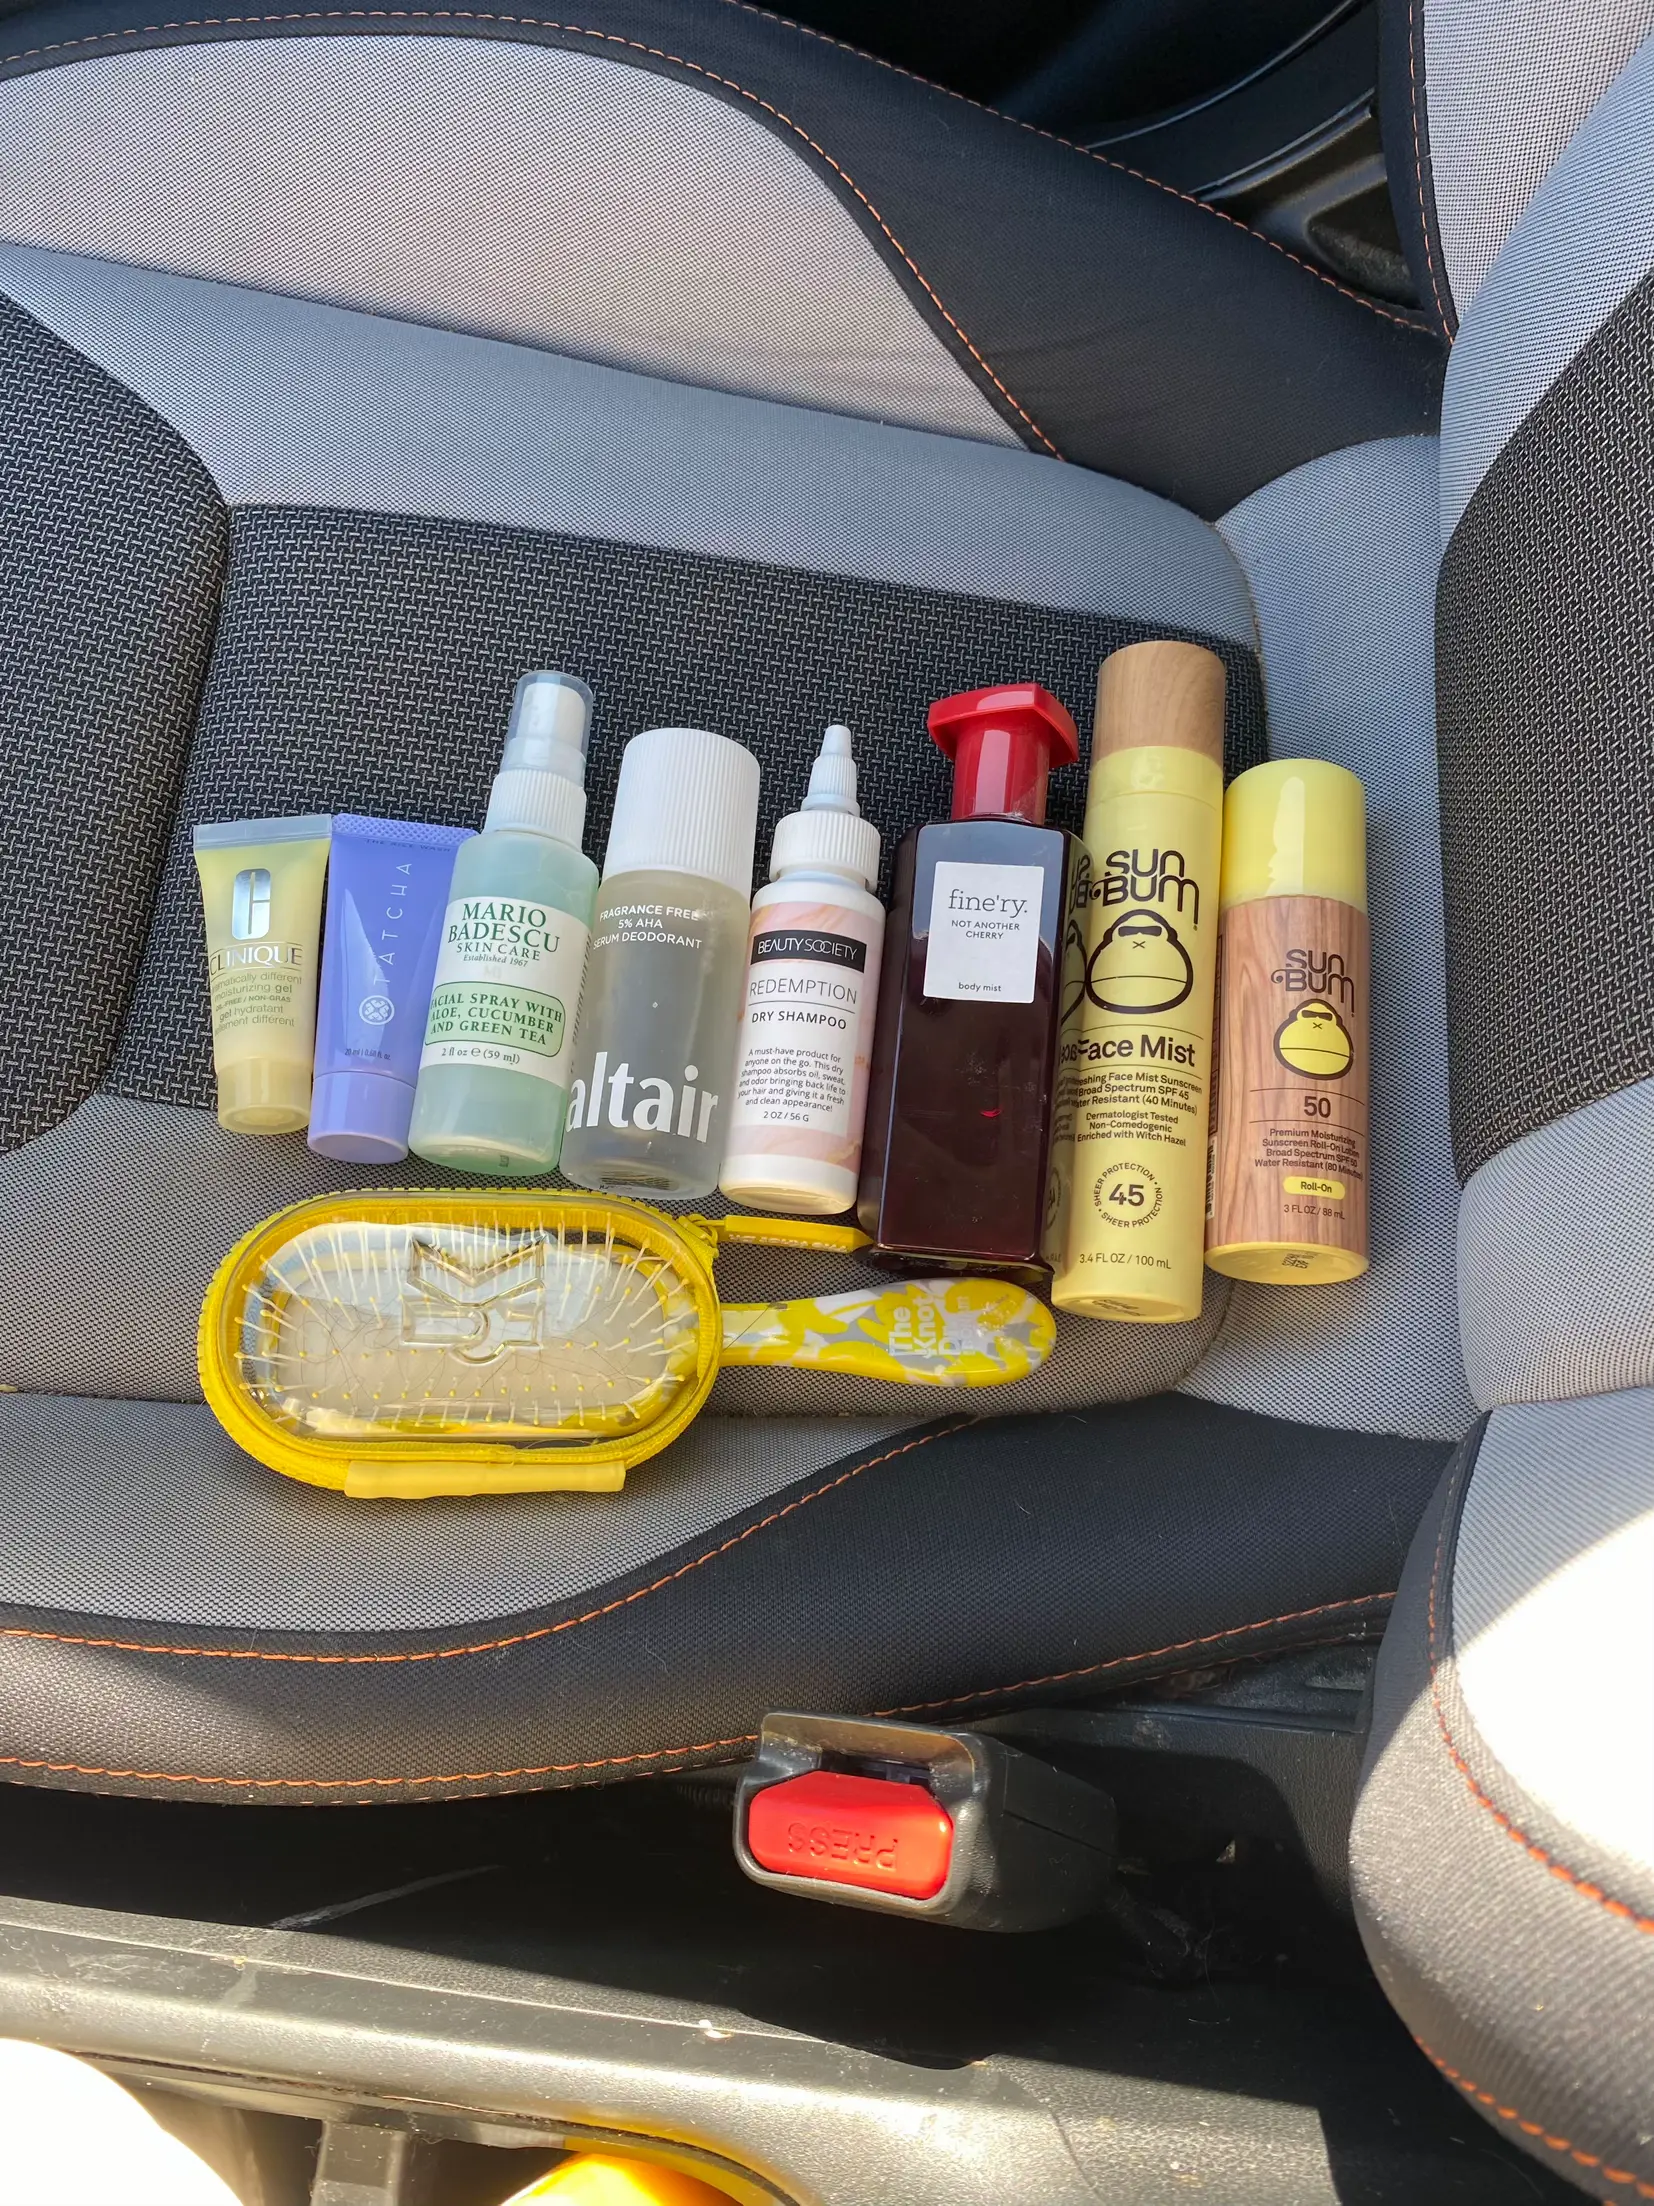 CAR ESSENTIALS, Gallery posted by meg